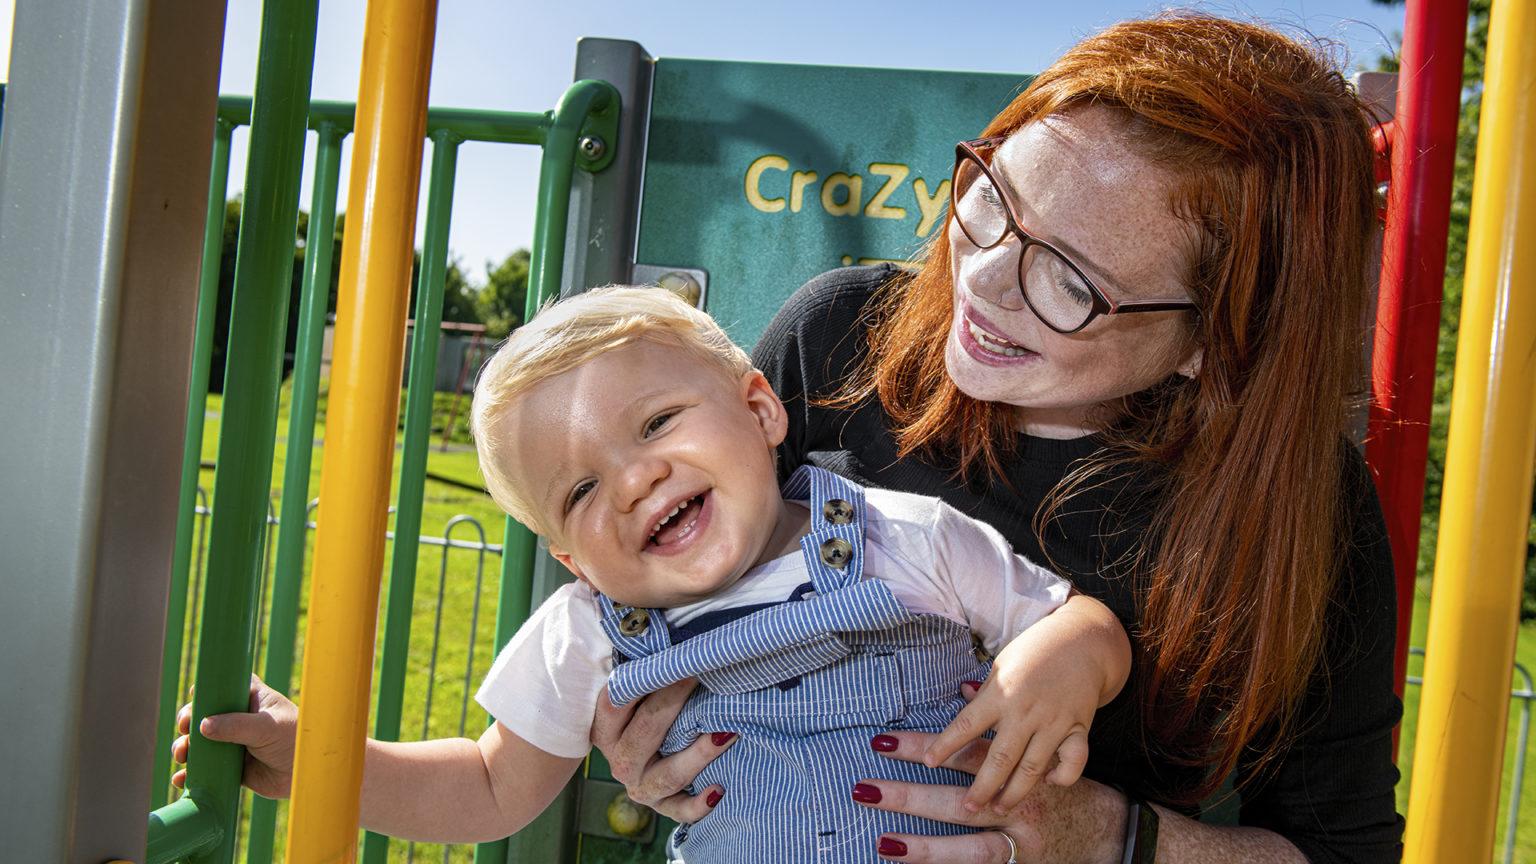 Microsoft Project Breathe : Caroline Powell and son Henry (14 months) at their home and local park, Teversham, Cambridge, CB1 9AX. 20 August 2020